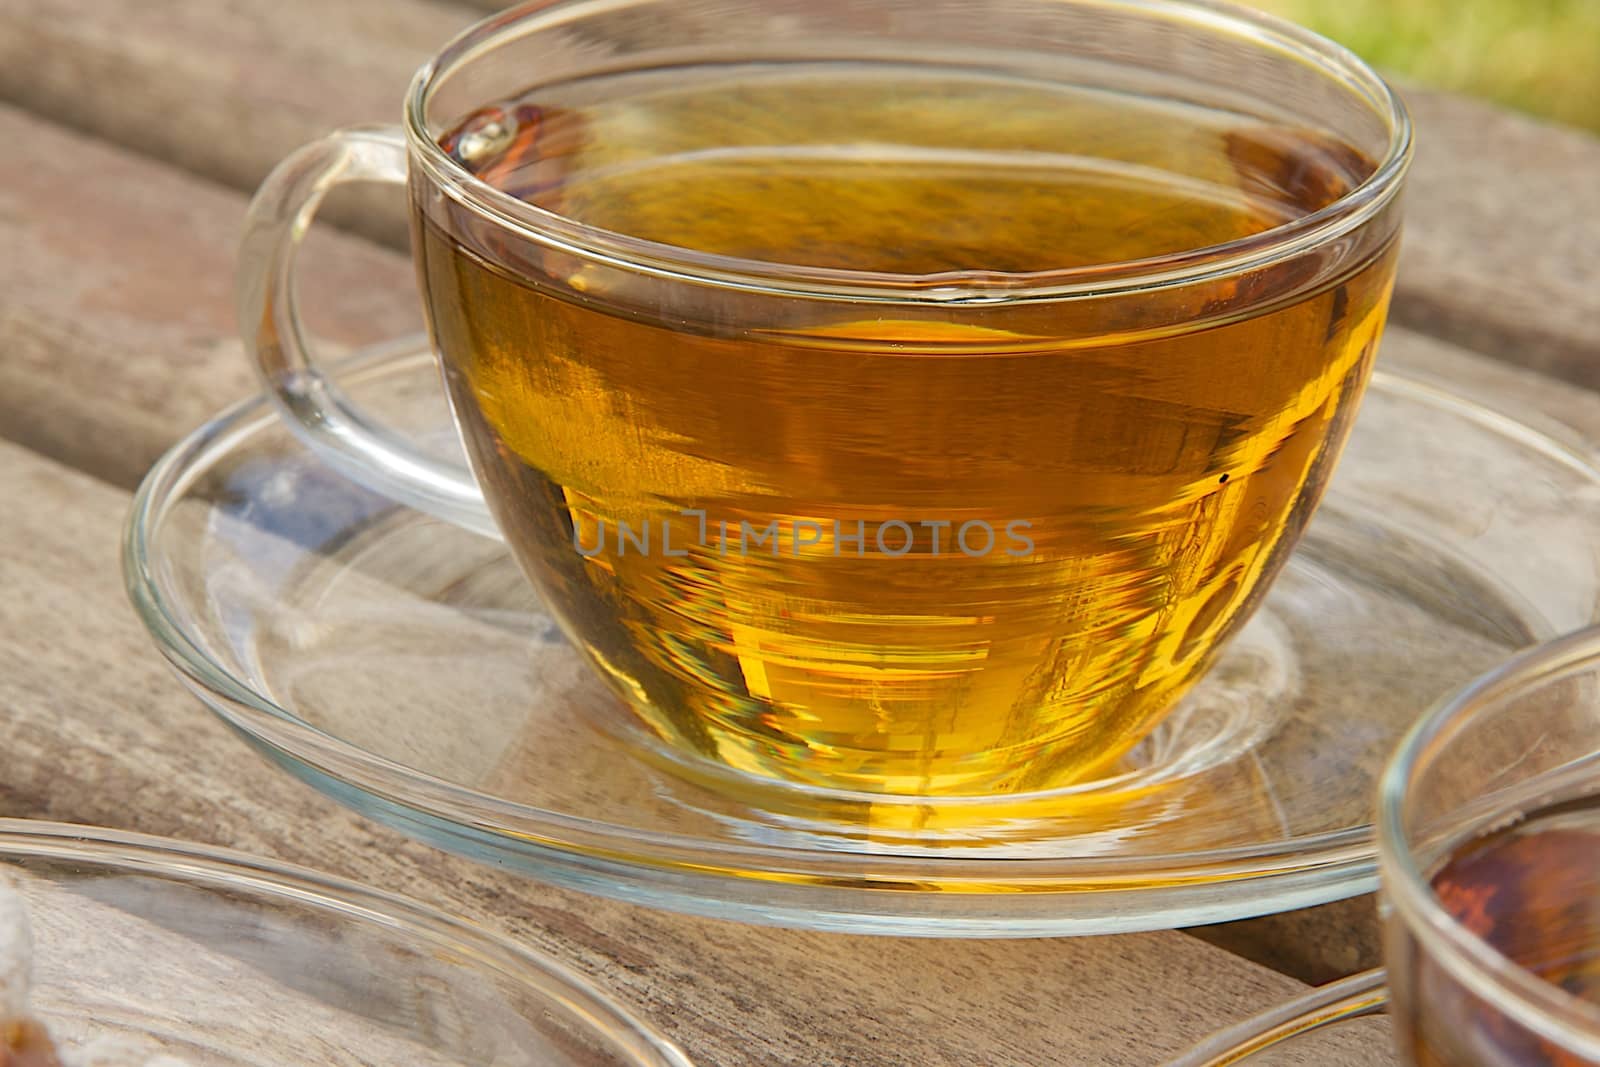 A glass cup of tea on an old wooden surface